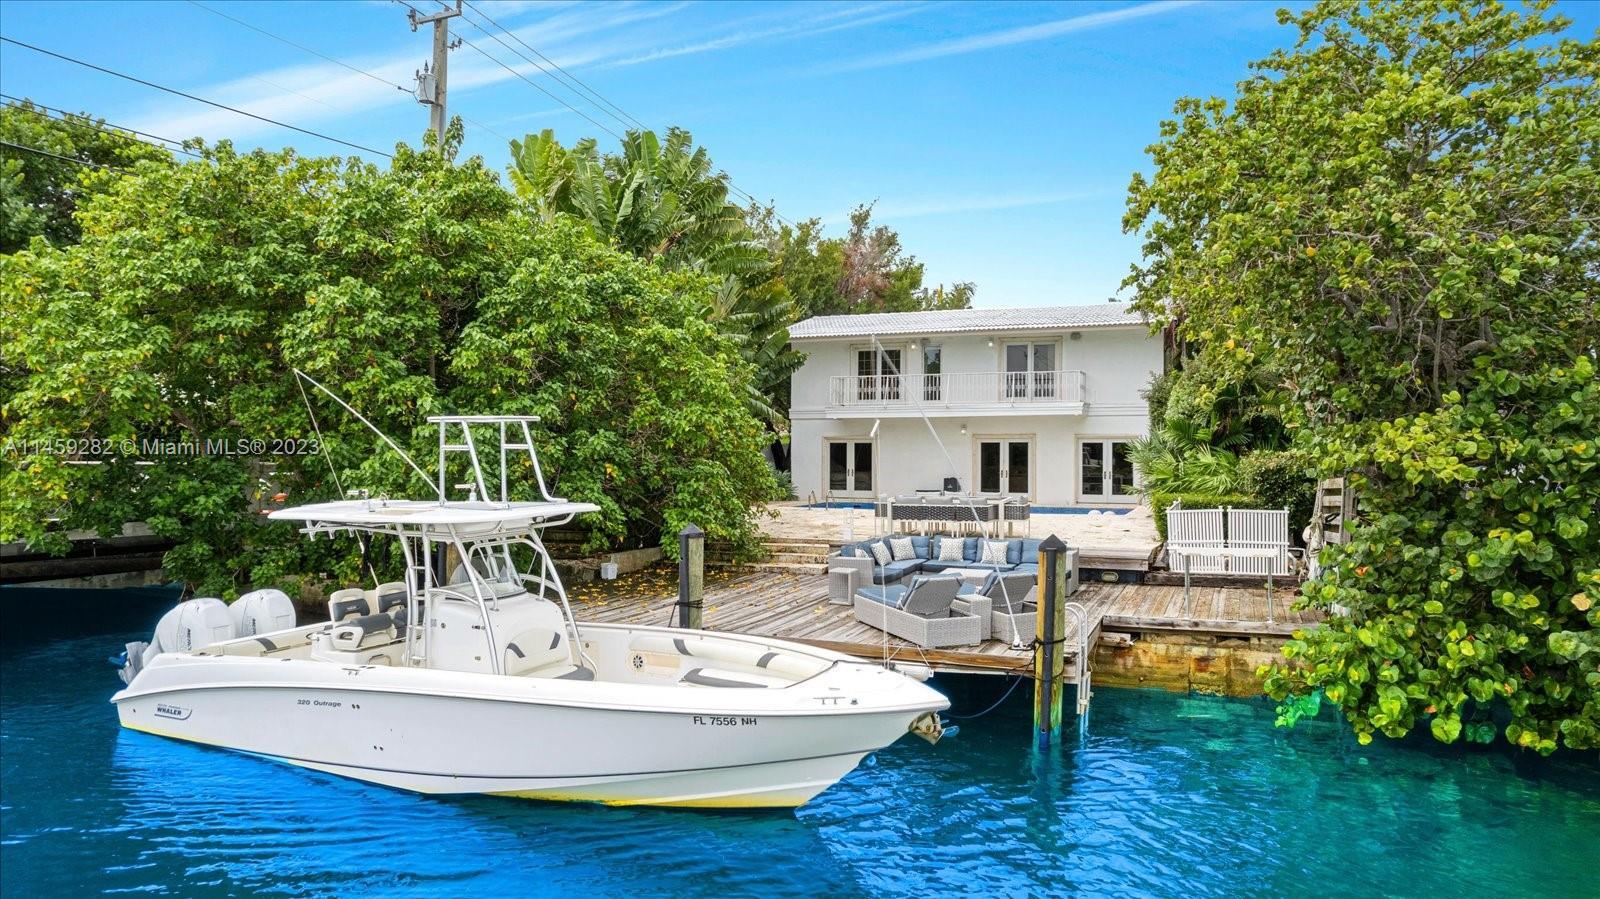 Charming waterfront Mediterranean villa on the coveted Venetian Islands offers the perfect opportuni